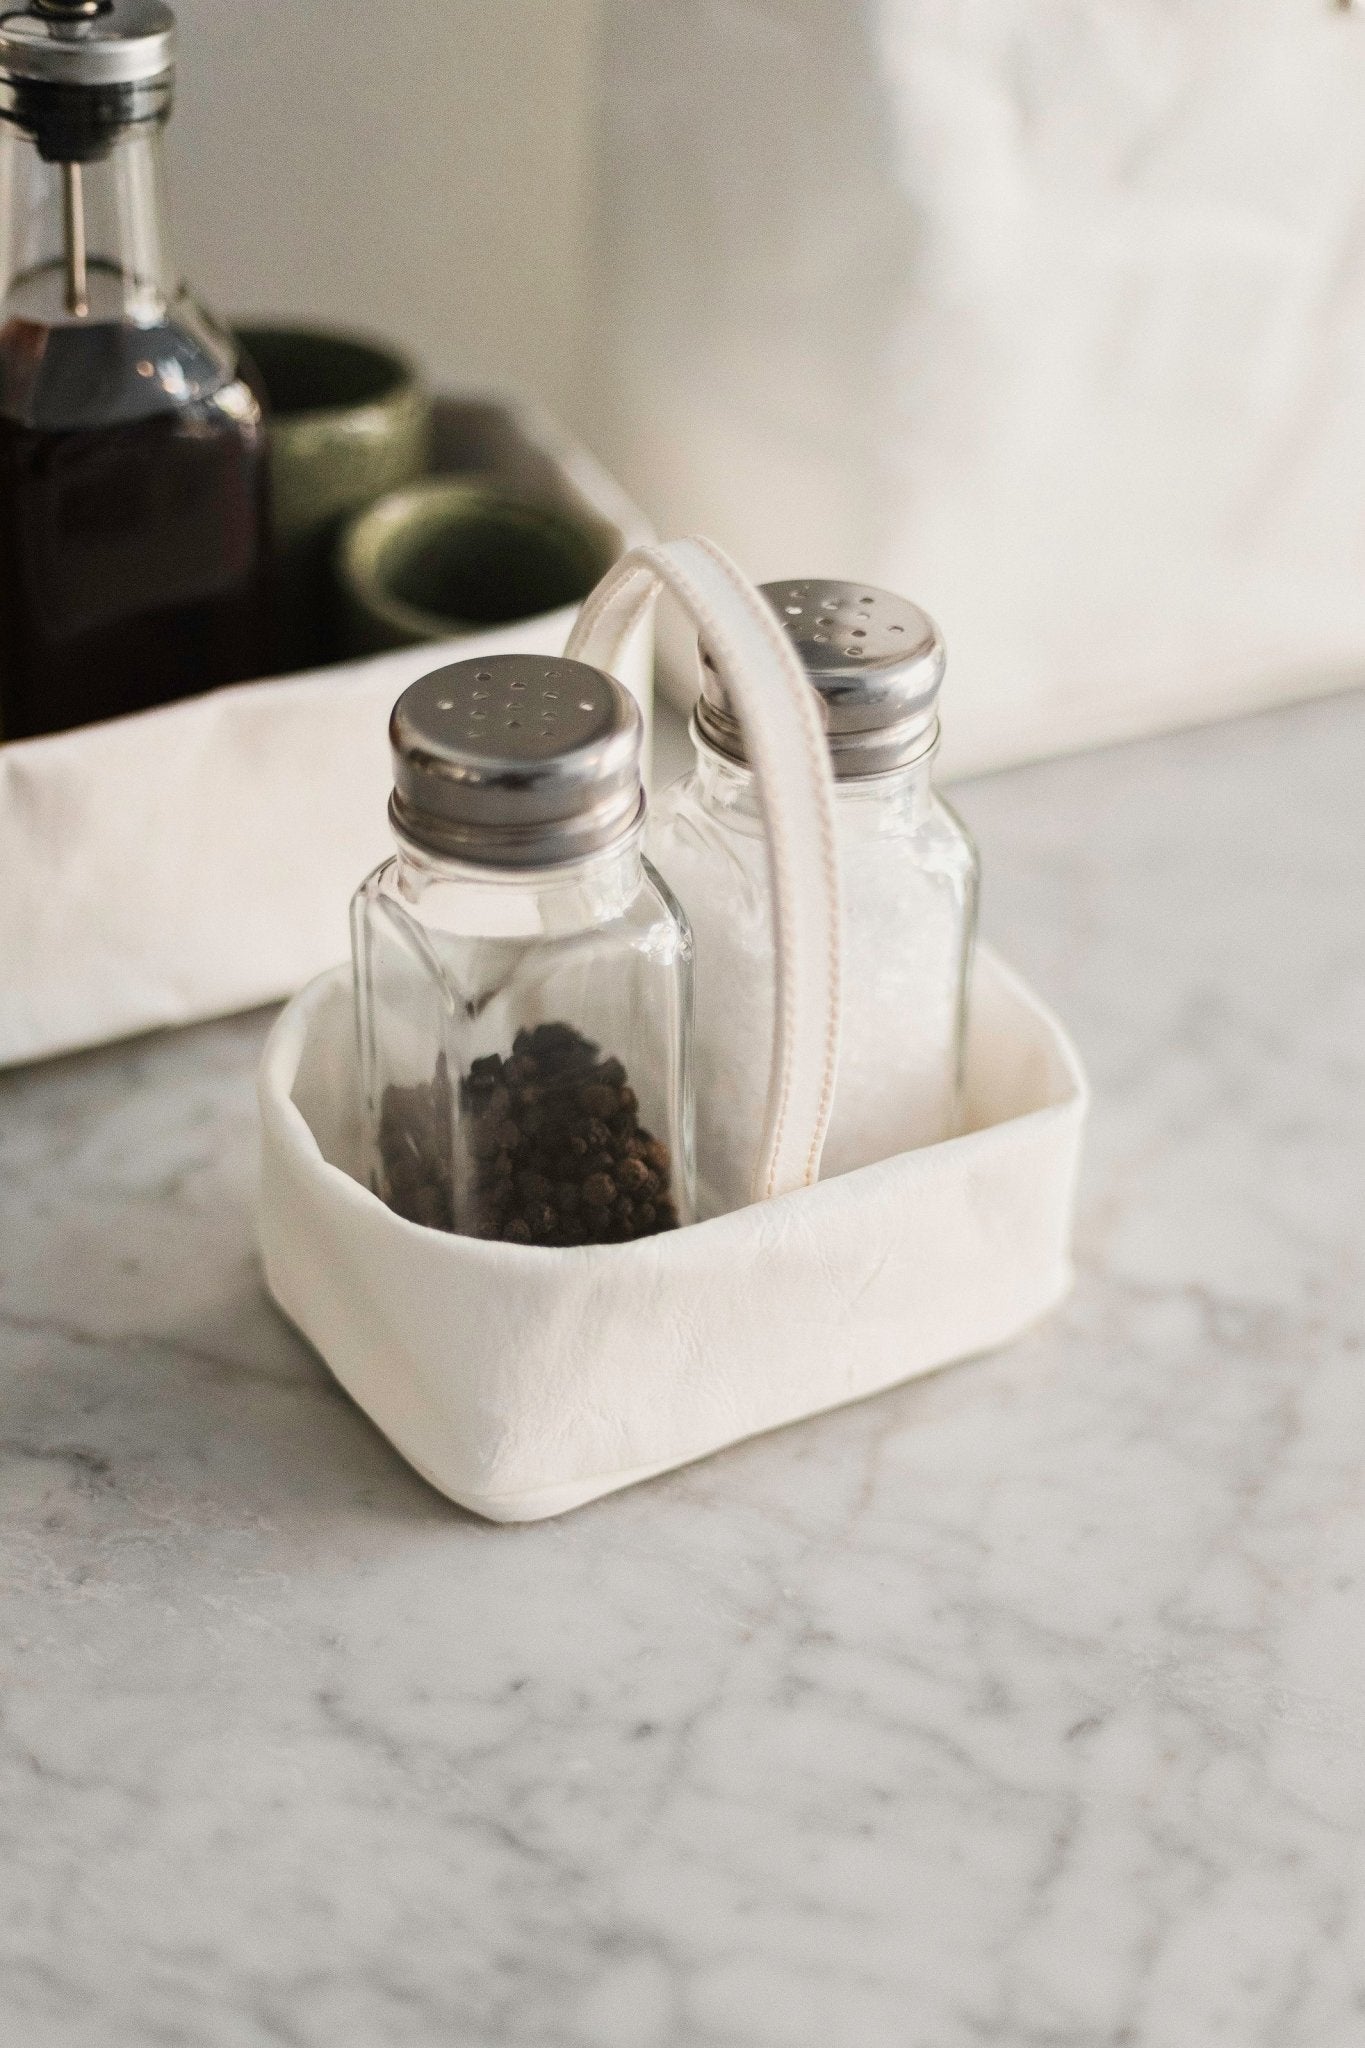 A small rectangular washable paper salt and pepper holder is shown with a washable paper small carry handle. The salt and pepper holder shown is white and is shown holding small glass salt and pepper shakers with metal lids.